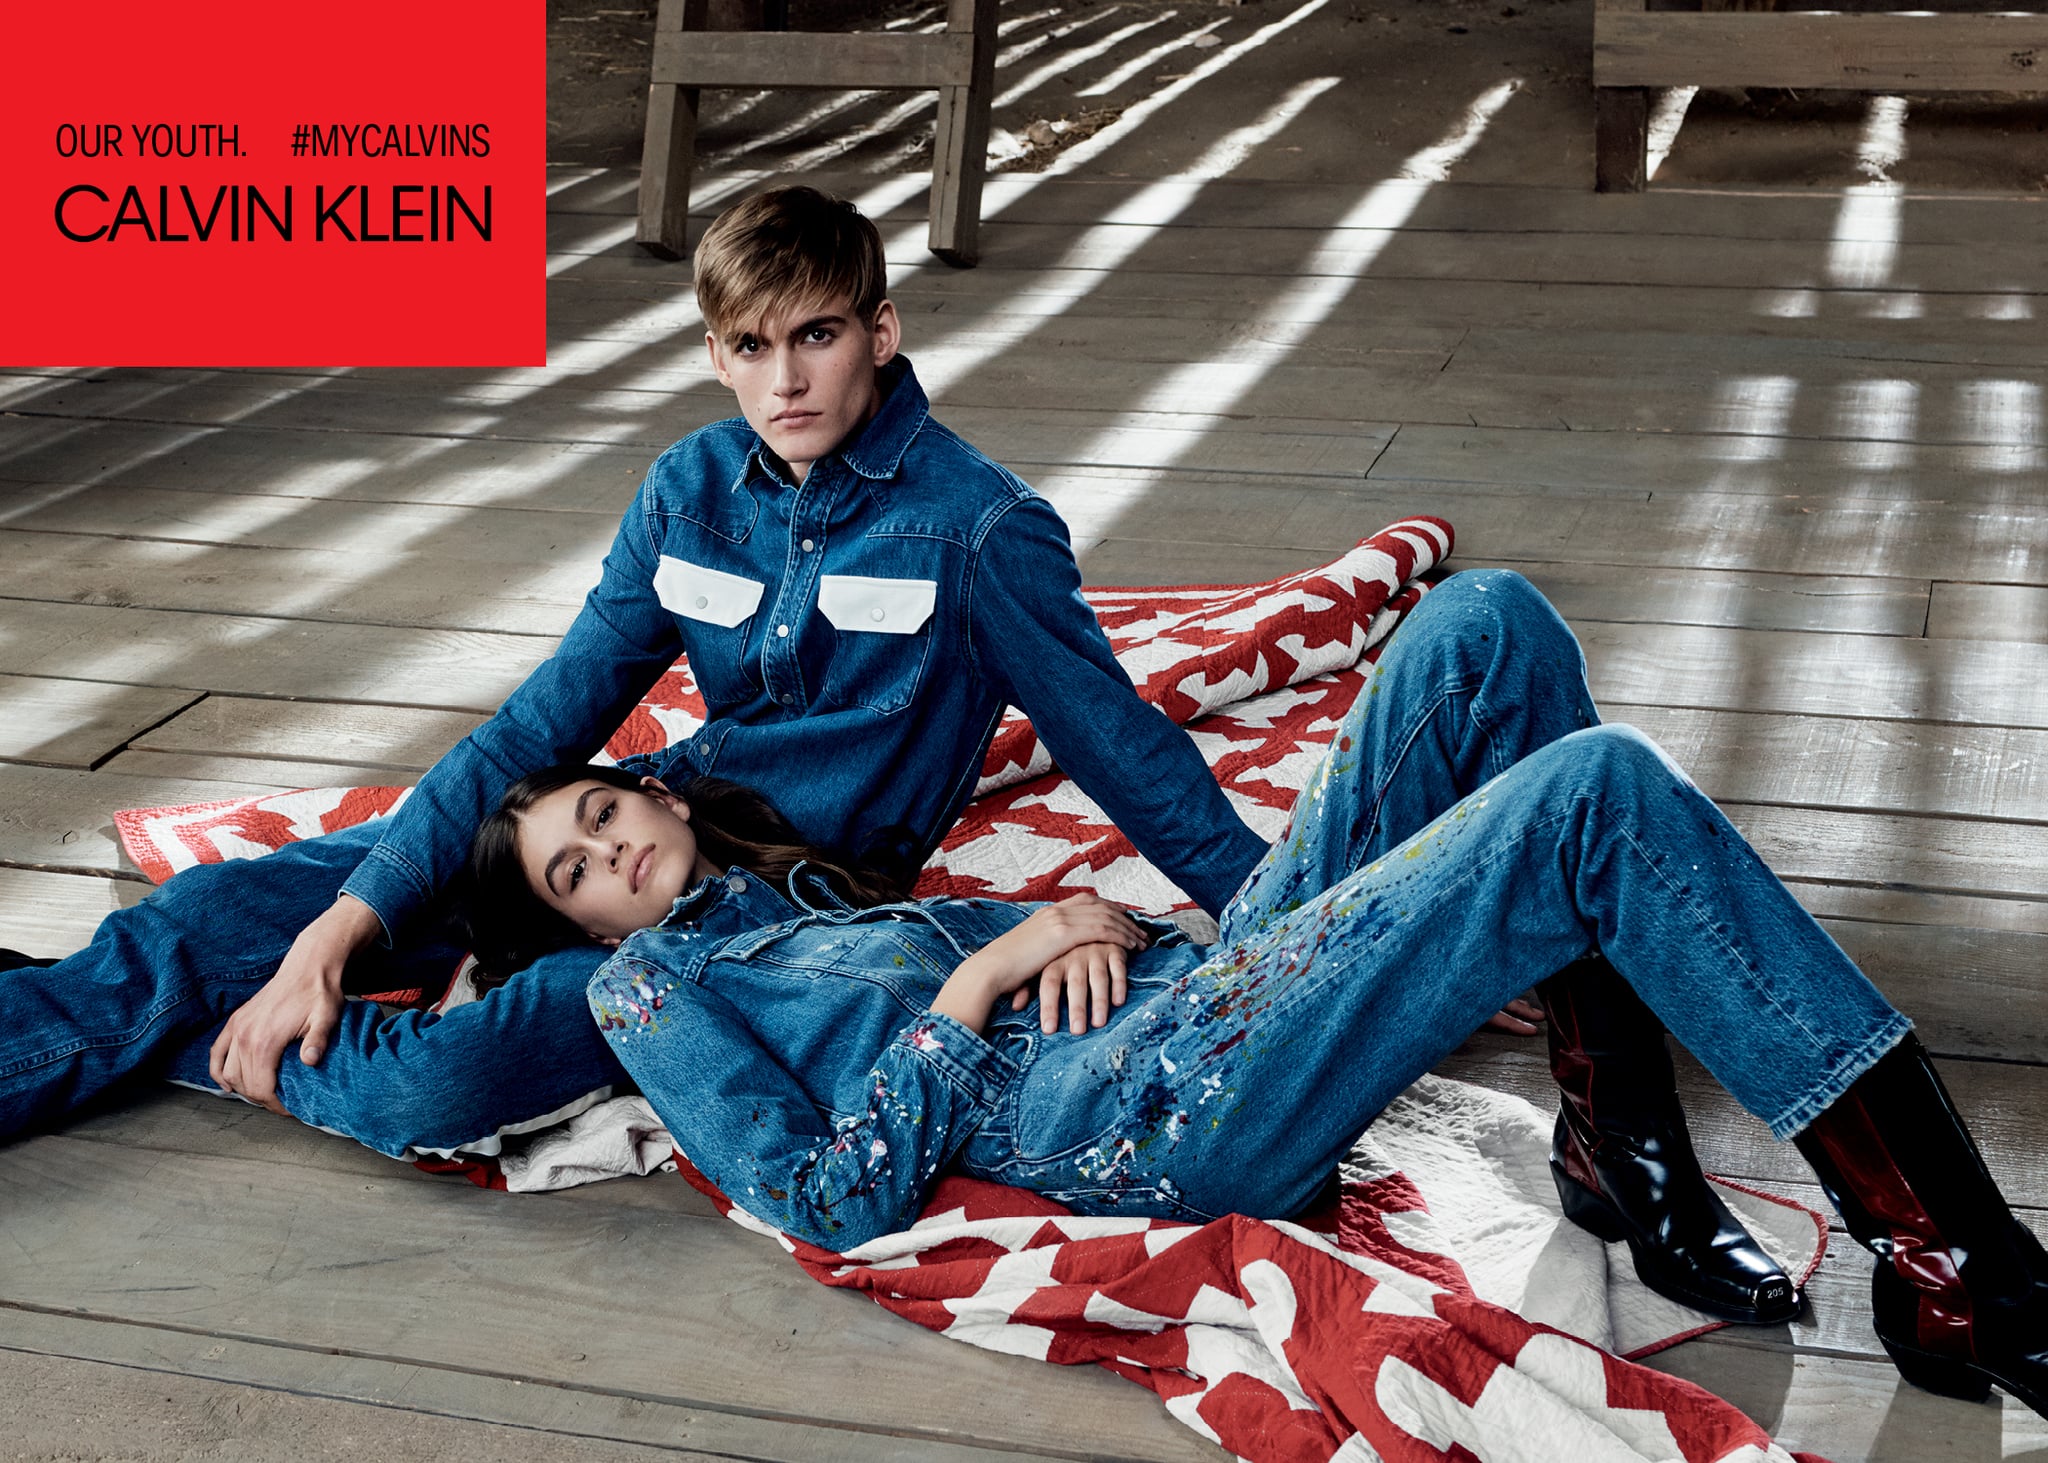 Raf Revamped the Iconic Calvin Klein Denim Campaigns | The Calvin Klein  Runway Is Going to Look Very Different in 2019 | POPSUGAR Fashion Photo 9